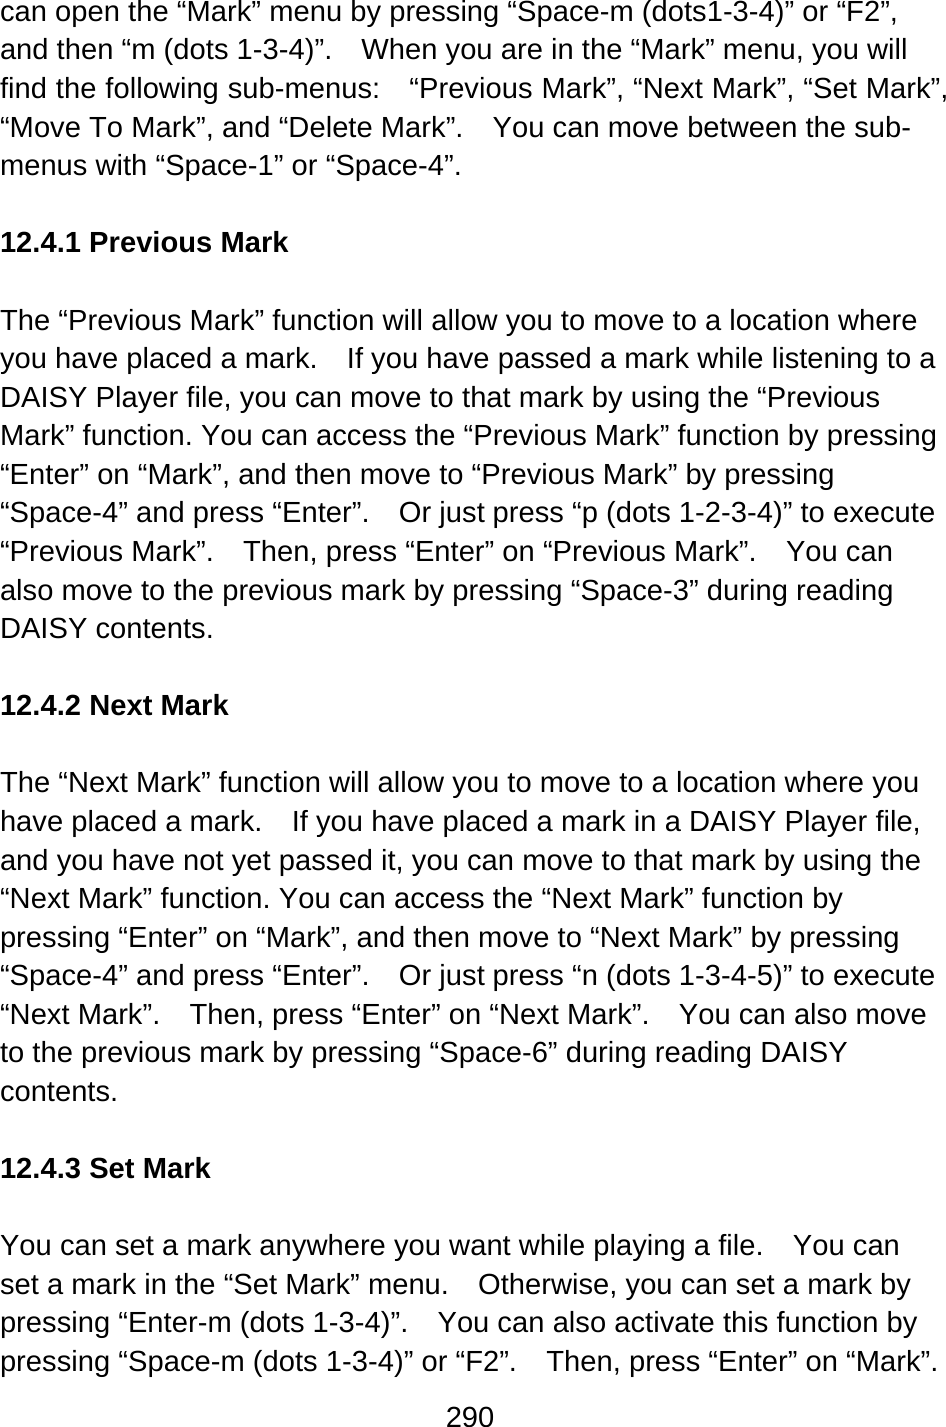 290  can open the “Mark” menu by pressing “Space-m (dots1-3-4)” or “F2”, and then “m (dots 1-3-4)”.    When you are in the “Mark” menu, you will find the following sub-menus:    “Previous Mark”, “Next Mark”, “Set Mark”, “Move To Mark”, and “Delete Mark”.    You can move between the sub-menus with “Space-1” or “Space-4”.  12.4.1 Previous Mark  The “Previous Mark” function will allow you to move to a location where you have placed a mark.    If you have passed a mark while listening to a DAISY Player file, you can move to that mark by using the “Previous Mark” function. You can access the “Previous Mark” function by pressing “Enter” on “Mark”, and then move to “Previous Mark” by pressing “Space-4” and press “Enter”.    Or just press “p (dots 1-2-3-4)” to execute “Previous Mark”.    Then, press “Enter” on “Previous Mark”.    You can also move to the previous mark by pressing “Space-3” during reading DAISY contents.  12.4.2 Next Mark  The “Next Mark” function will allow you to move to a location where you have placed a mark.    If you have placed a mark in a DAISY Player file, and you have not yet passed it, you can move to that mark by using the “Next Mark” function. You can access the “Next Mark” function by pressing “Enter” on “Mark”, and then move to “Next Mark” by pressing “Space-4” and press “Enter”.    Or just press “n (dots 1-3-4-5)” to execute “Next Mark”.    Then, press “Enter” on “Next Mark”.    You can also move to the previous mark by pressing “Space-6” during reading DAISY contents.  12.4.3 Set Mark  You can set a mark anywhere you want while playing a file.    You can set a mark in the “Set Mark” menu.    Otherwise, you can set a mark by pressing “Enter-m (dots 1-3-4)”.    You can also activate this function by pressing “Space-m (dots 1-3-4)” or “F2”.    Then, press “Enter” on “Mark”. 